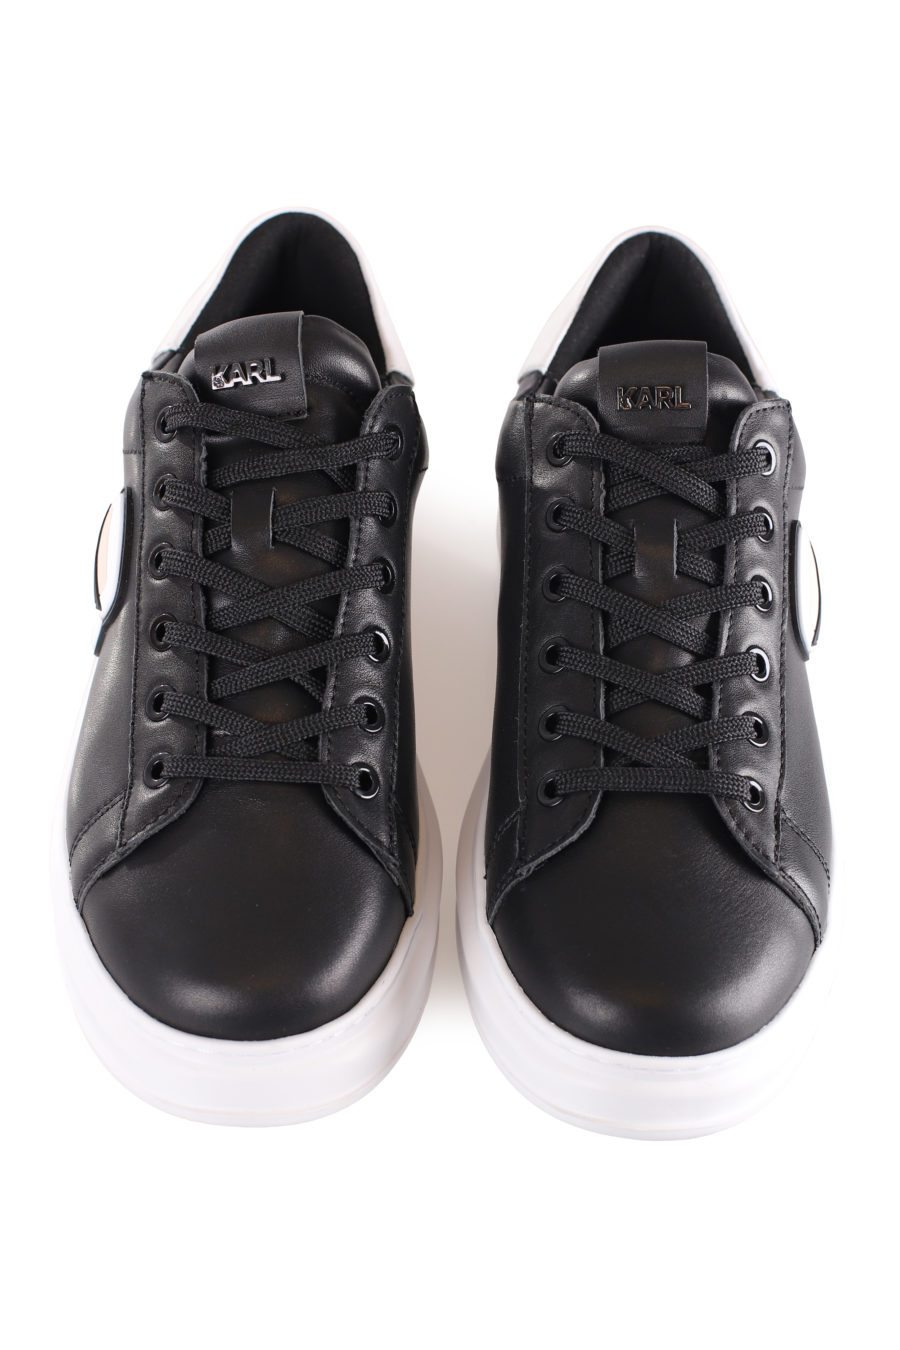 Black trainers with rubber "karl" logo - IMG 9604